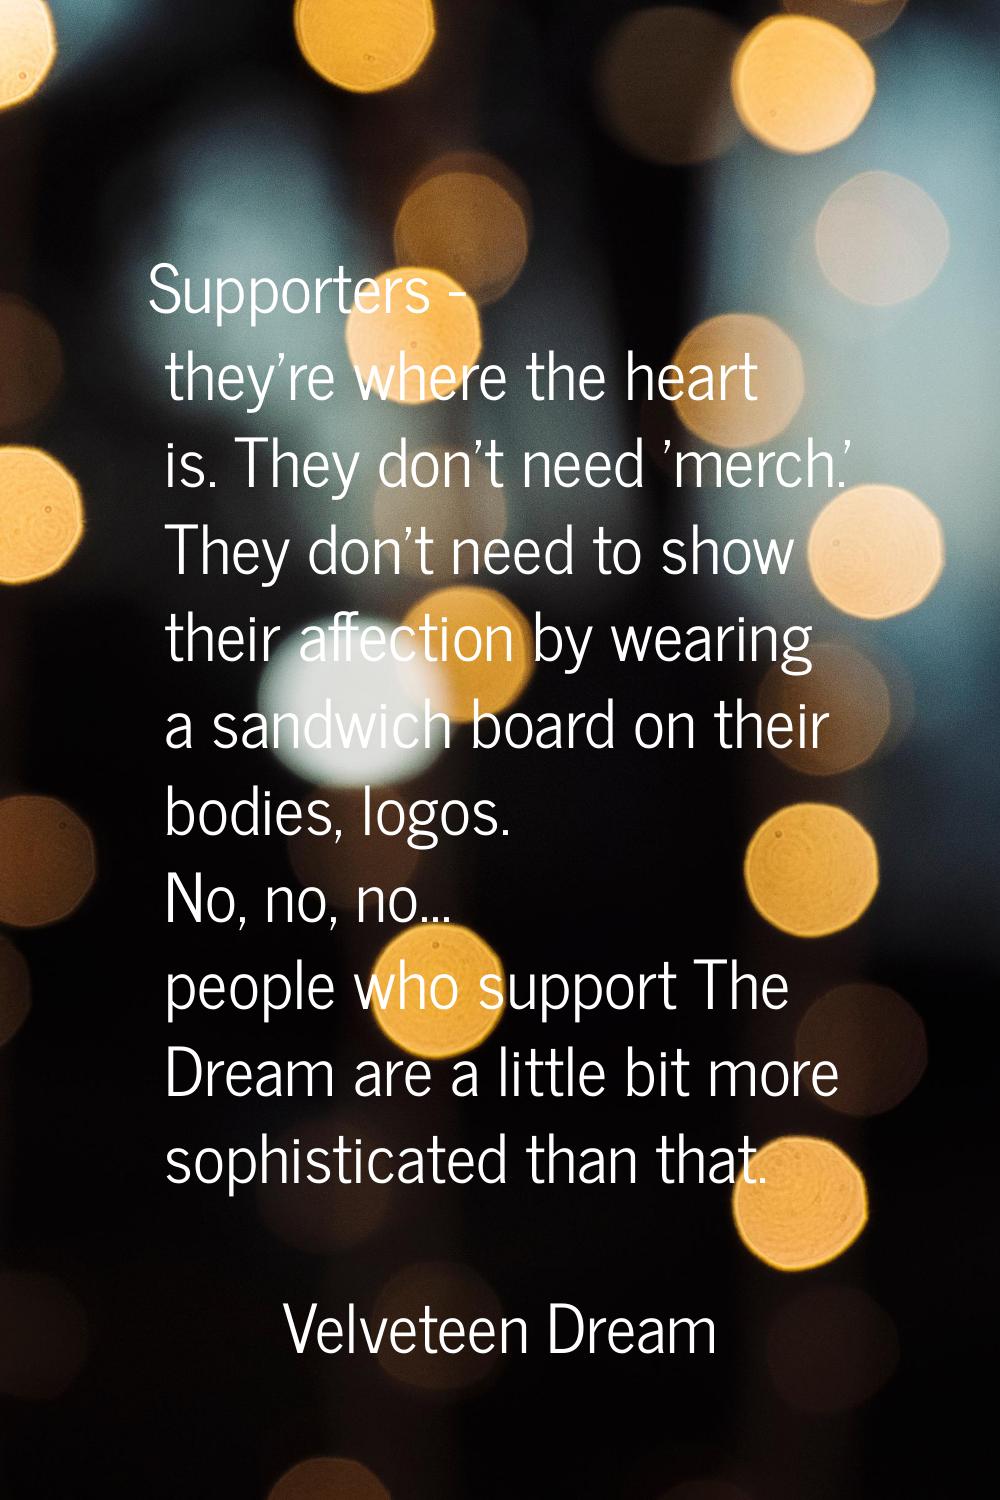 Supporters - they're where the heart is. They don't need 'merch.' They don't need to show their aff